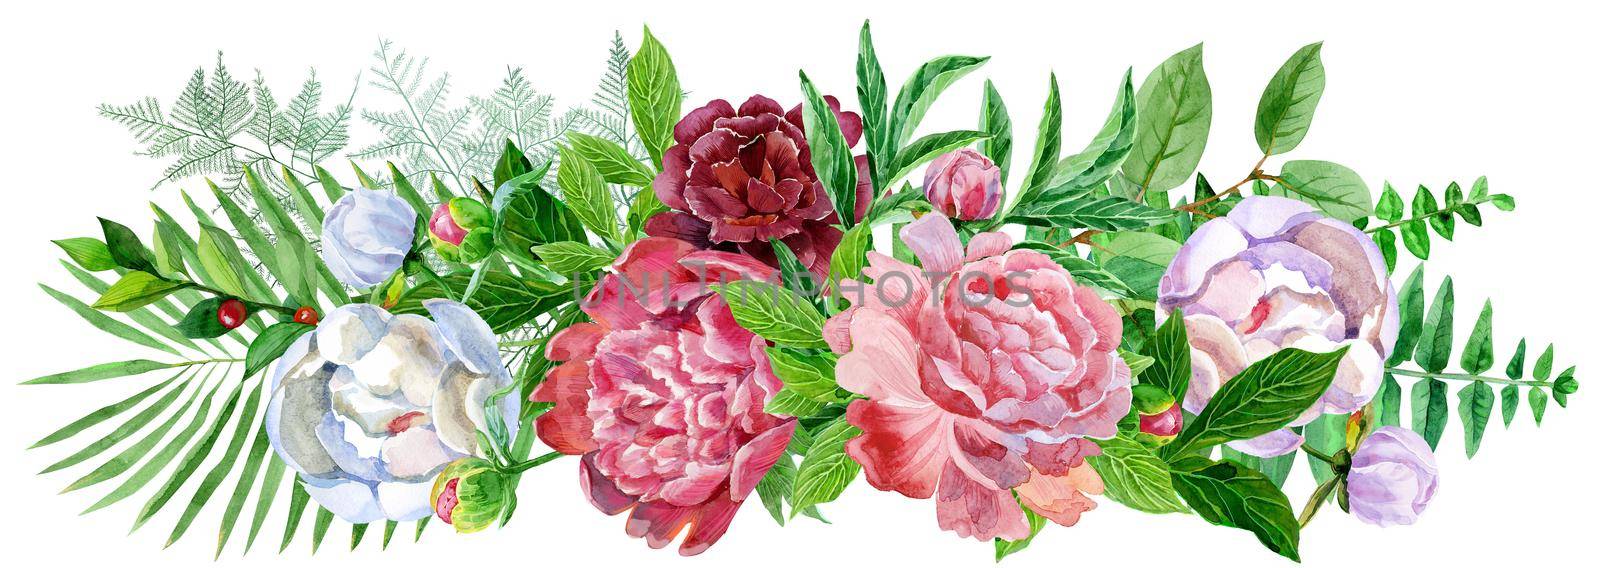 Garden peony. Watercolor, hand painted, isolated on white background. by NataOmsk